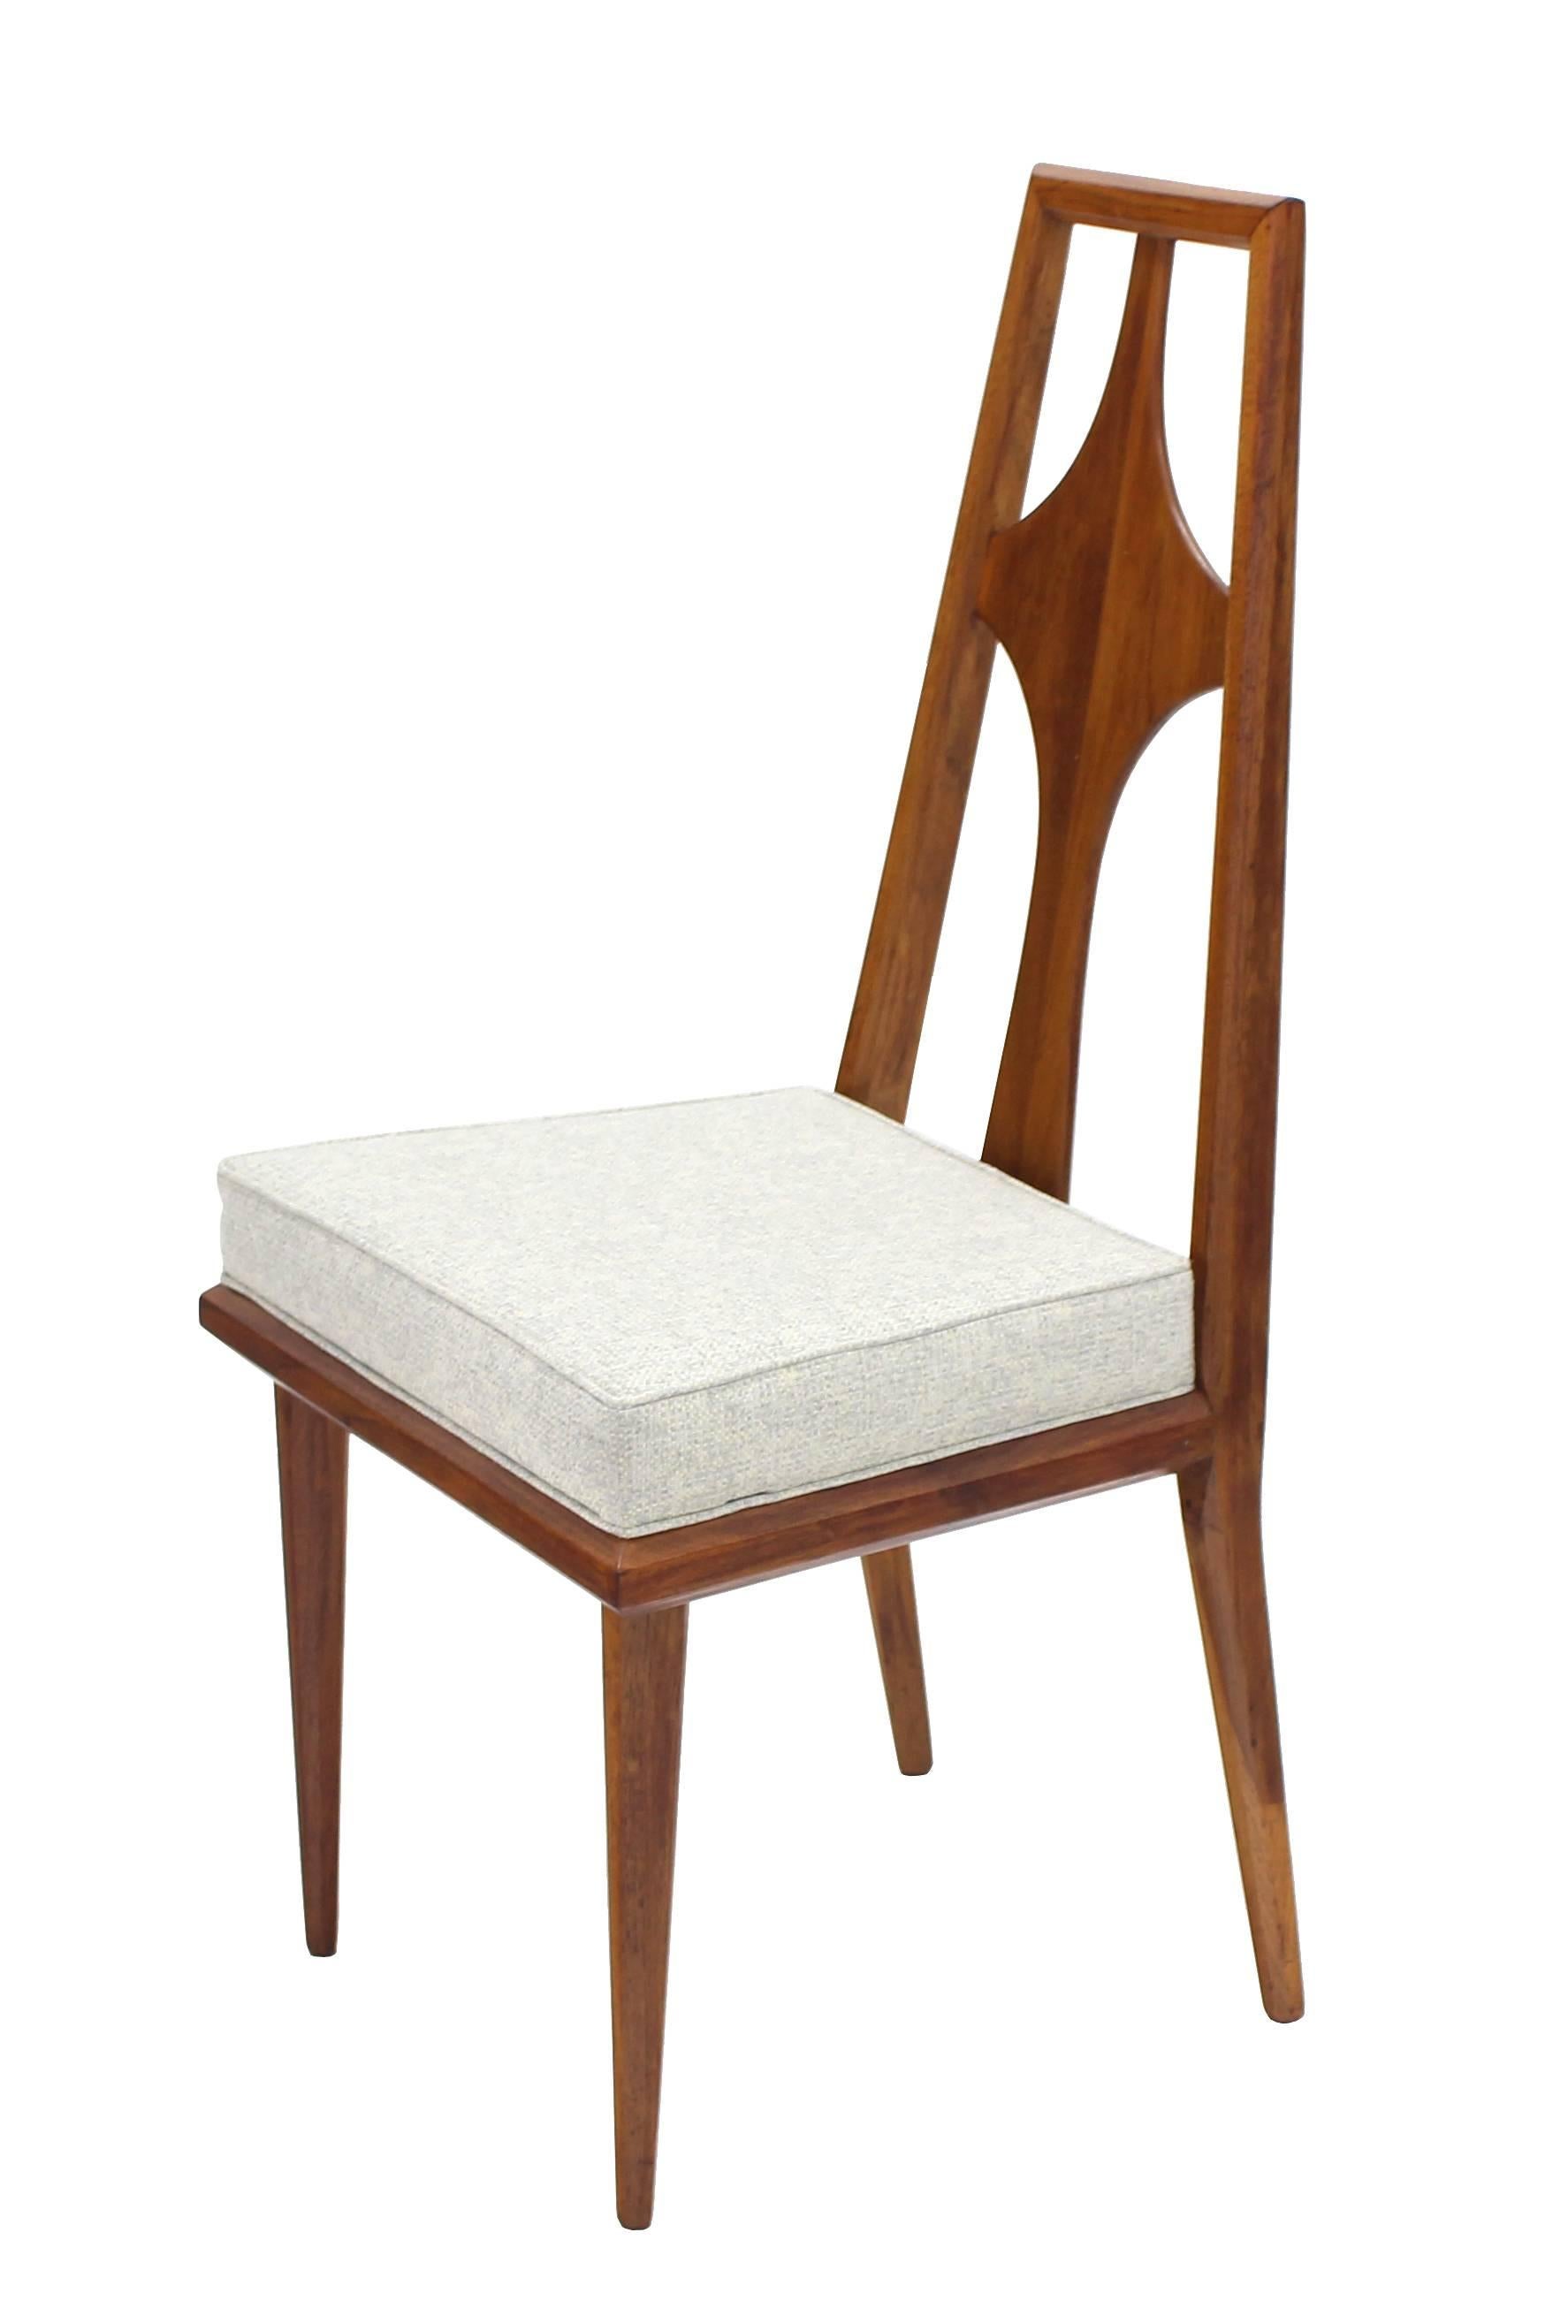 Set of Six Swedish Dining Chairs  New Upholstery In Excellent Condition For Sale In Rockaway, NJ